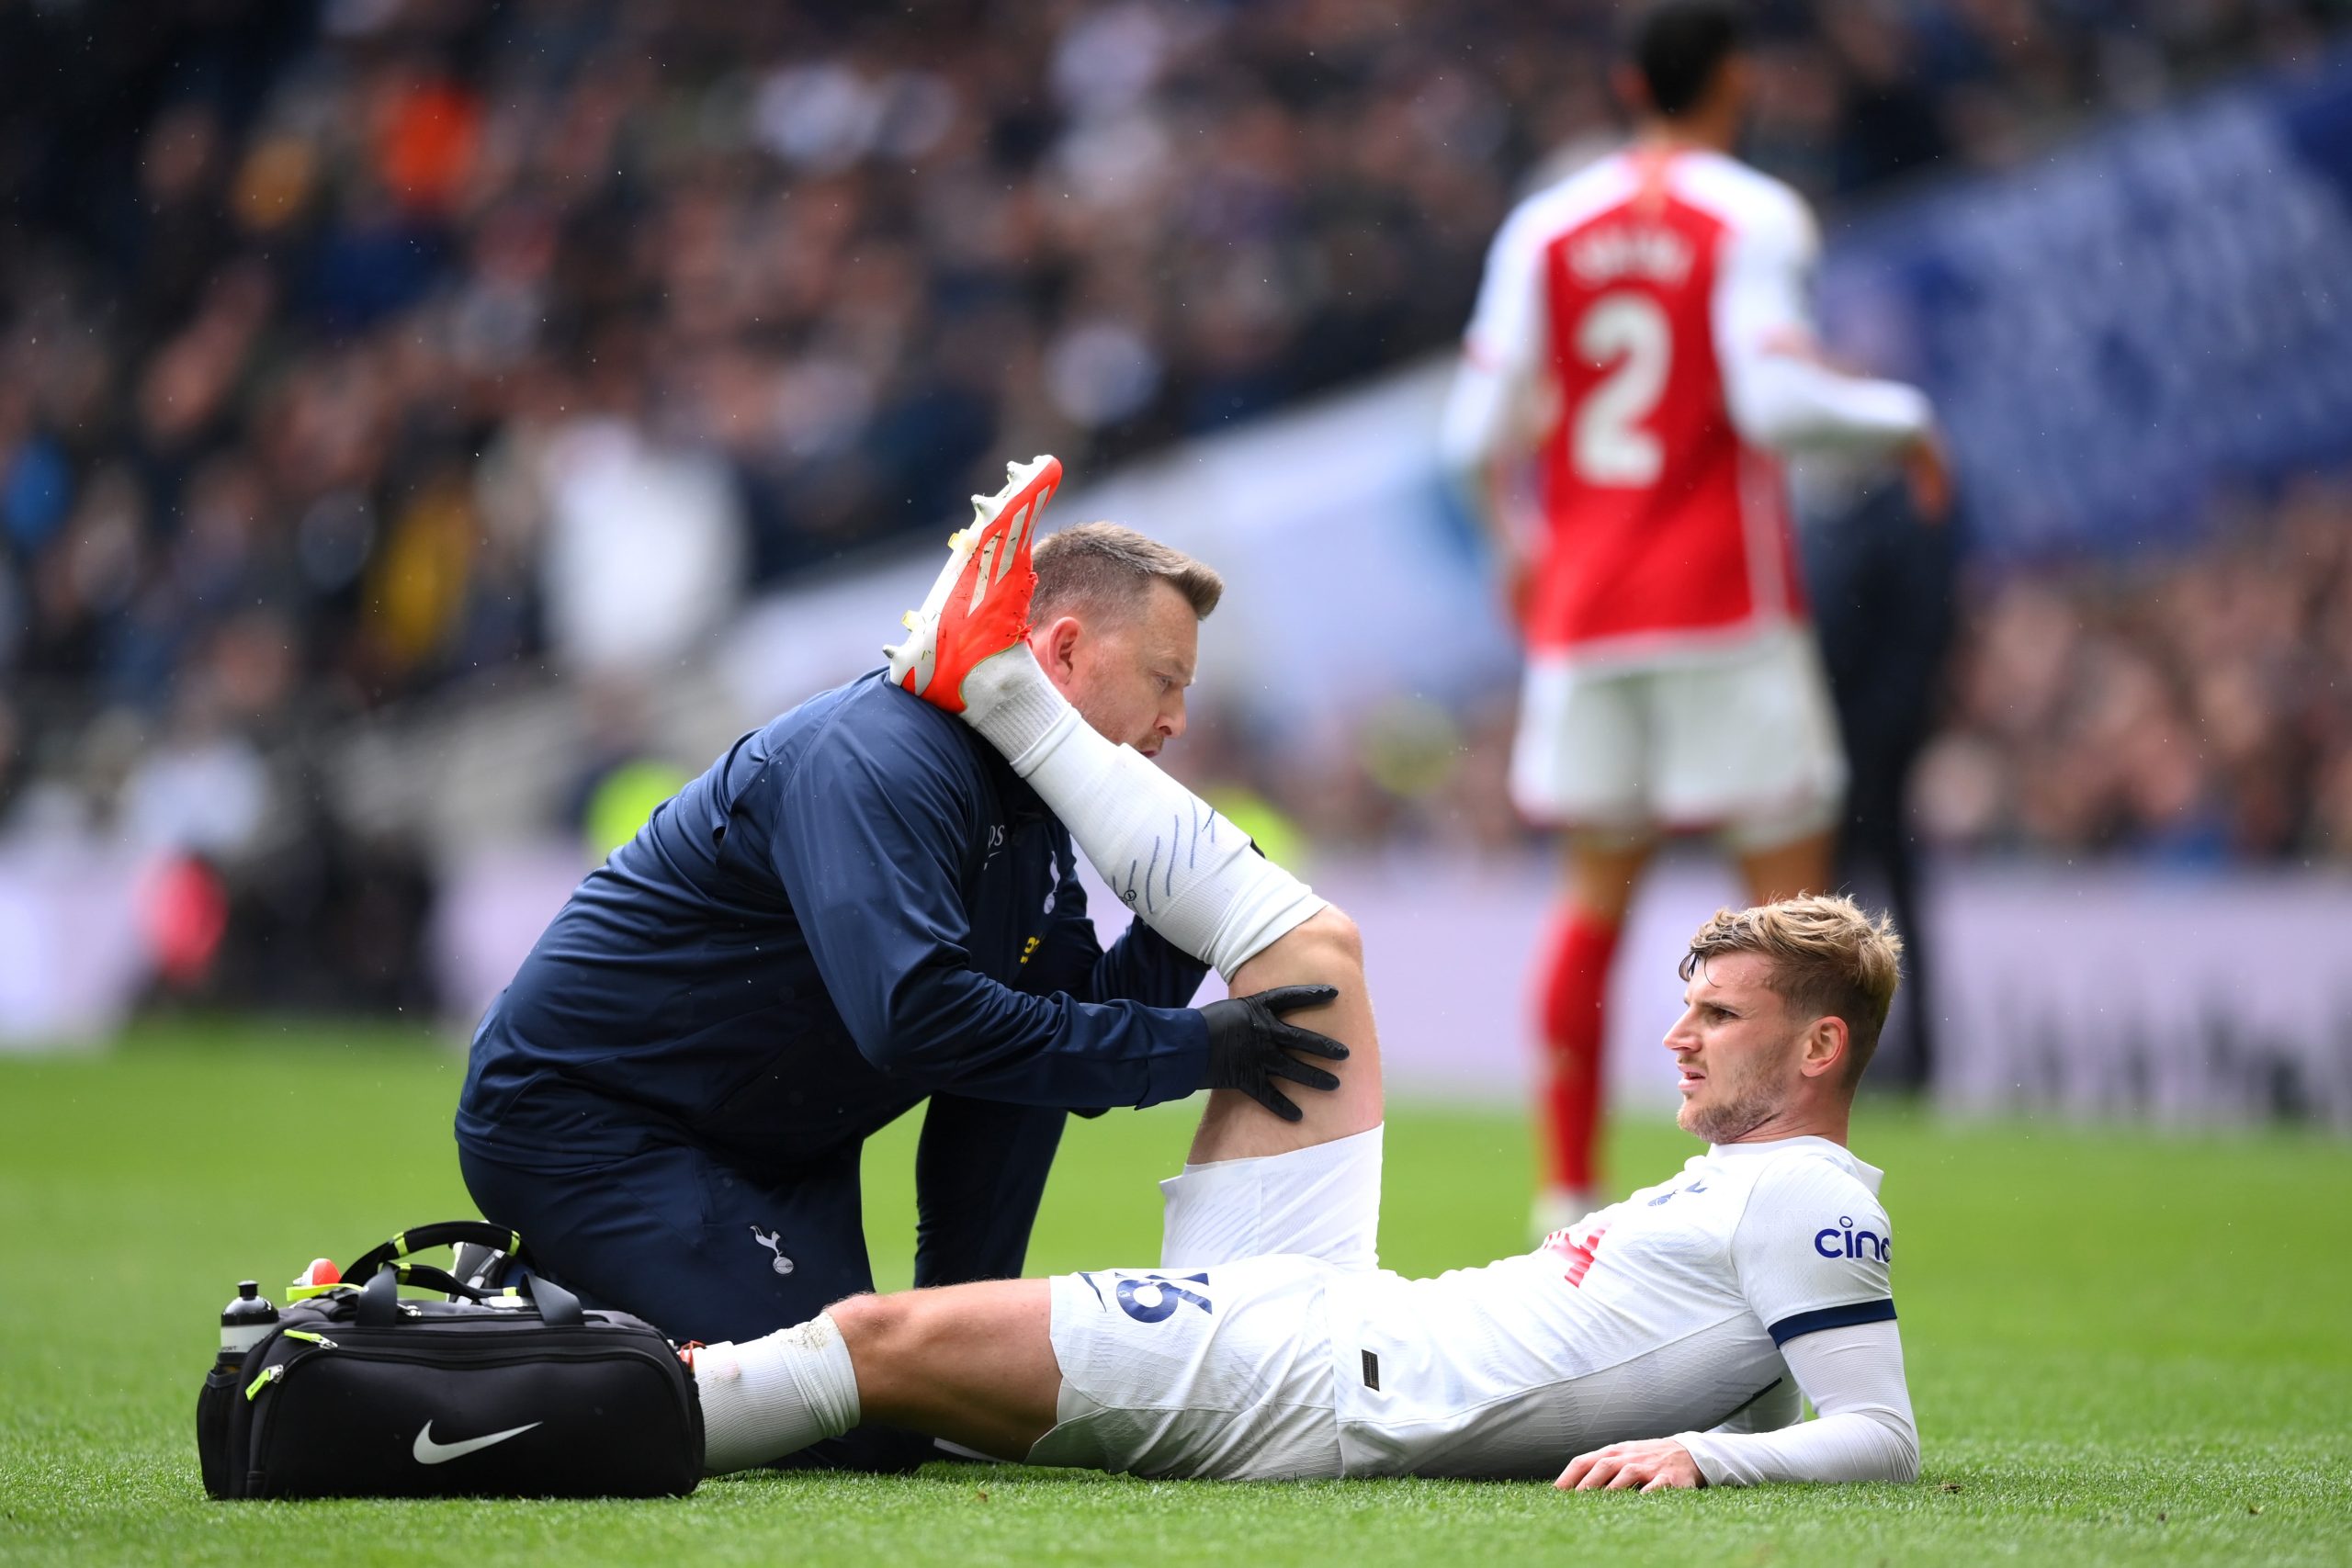 Injury News: Tottenham star who picked up an injury against Arsenal awaits scan results ahead of anticipated Chelsea reunion